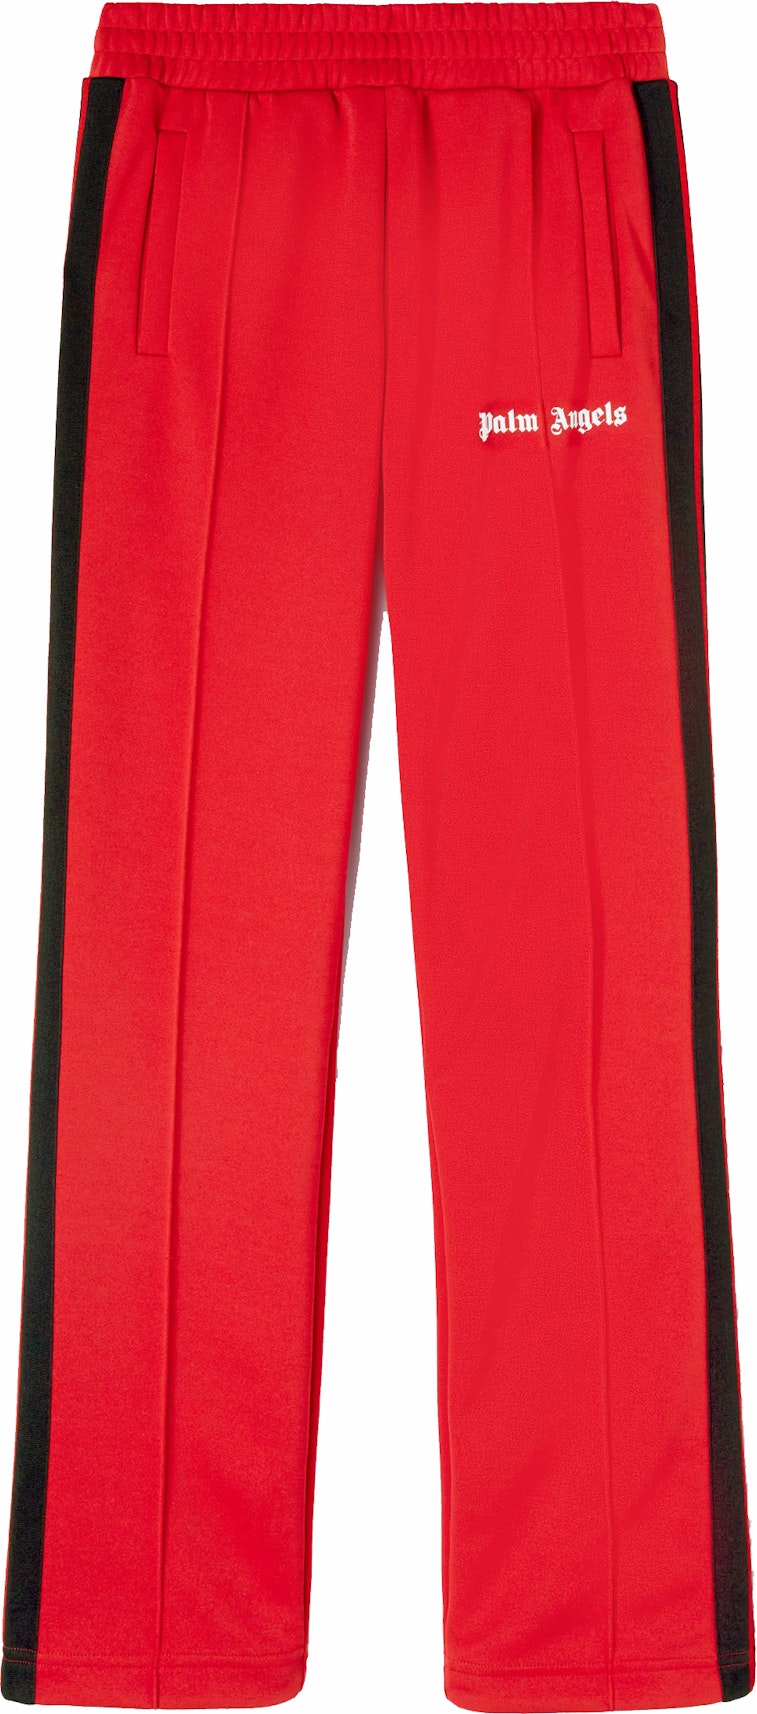 Palm Angels Track Pants Red/Black - SS22 - US